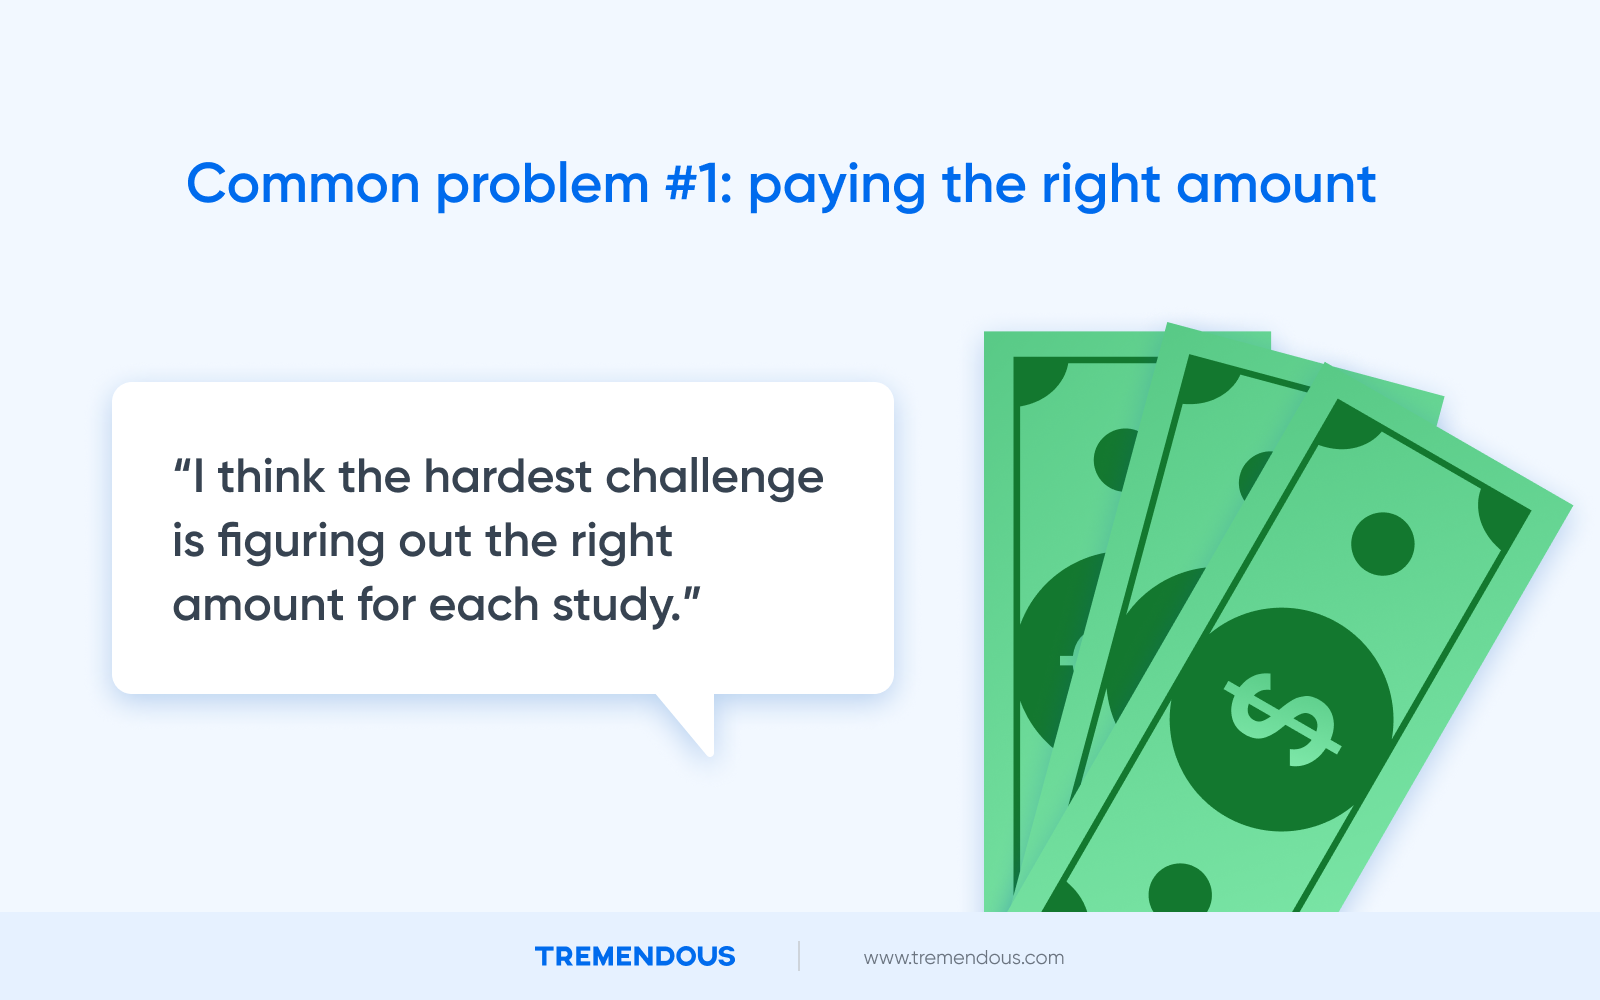 Text at the top reads: "Common problem #1: paying the right amount." On the left, a quote reads, "I think the hardest challenge is figuring out the right amount for each study." On the right is a cartoon image of money.